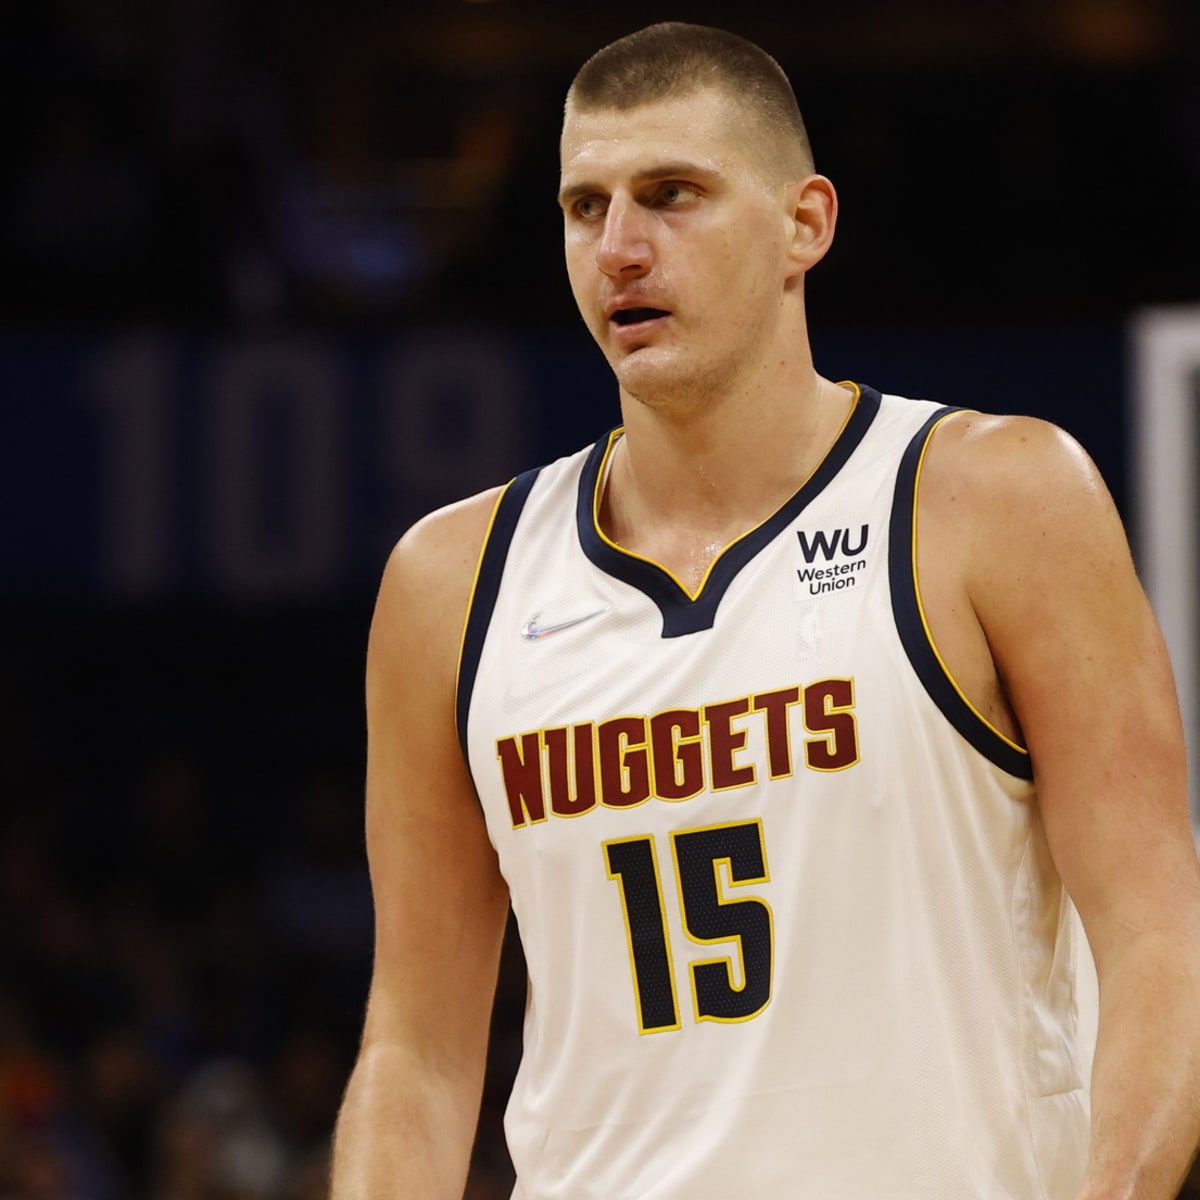 LA Clippers vs Denver Nuggets: Injury Report, Predicted Lineups and  Starting 5s - January 19th , 2022